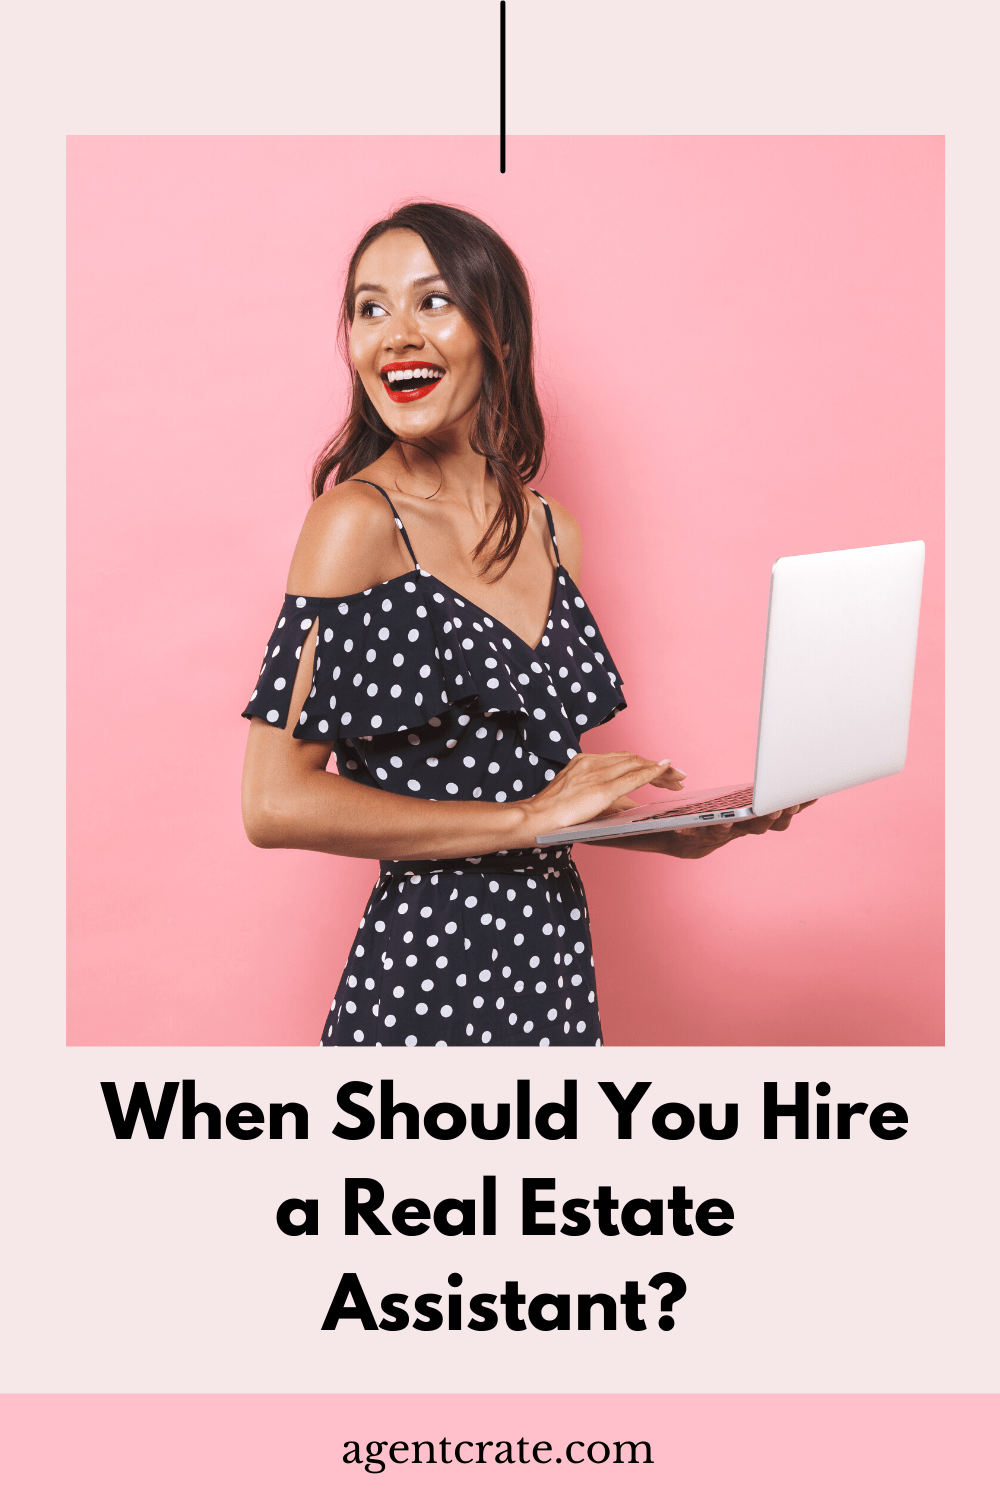 How to be a real estate assistant